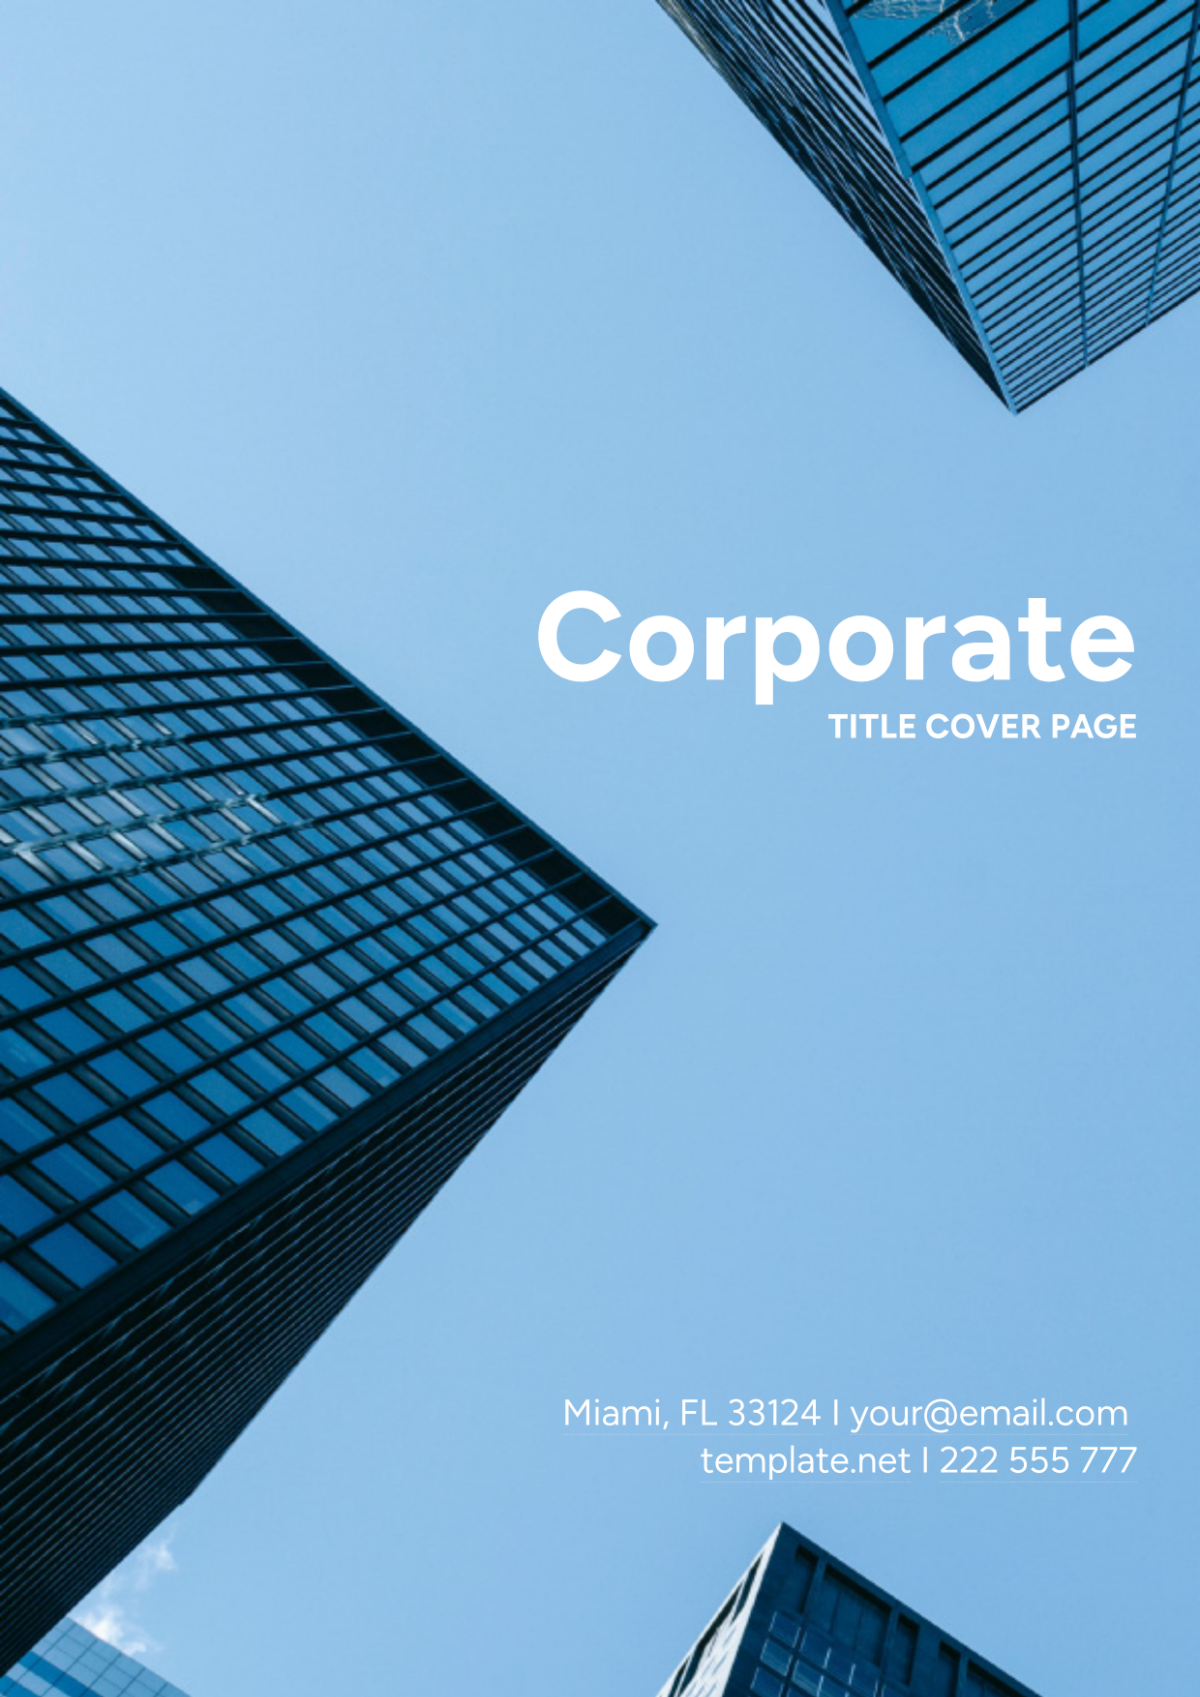 Corporate Title Cover Page